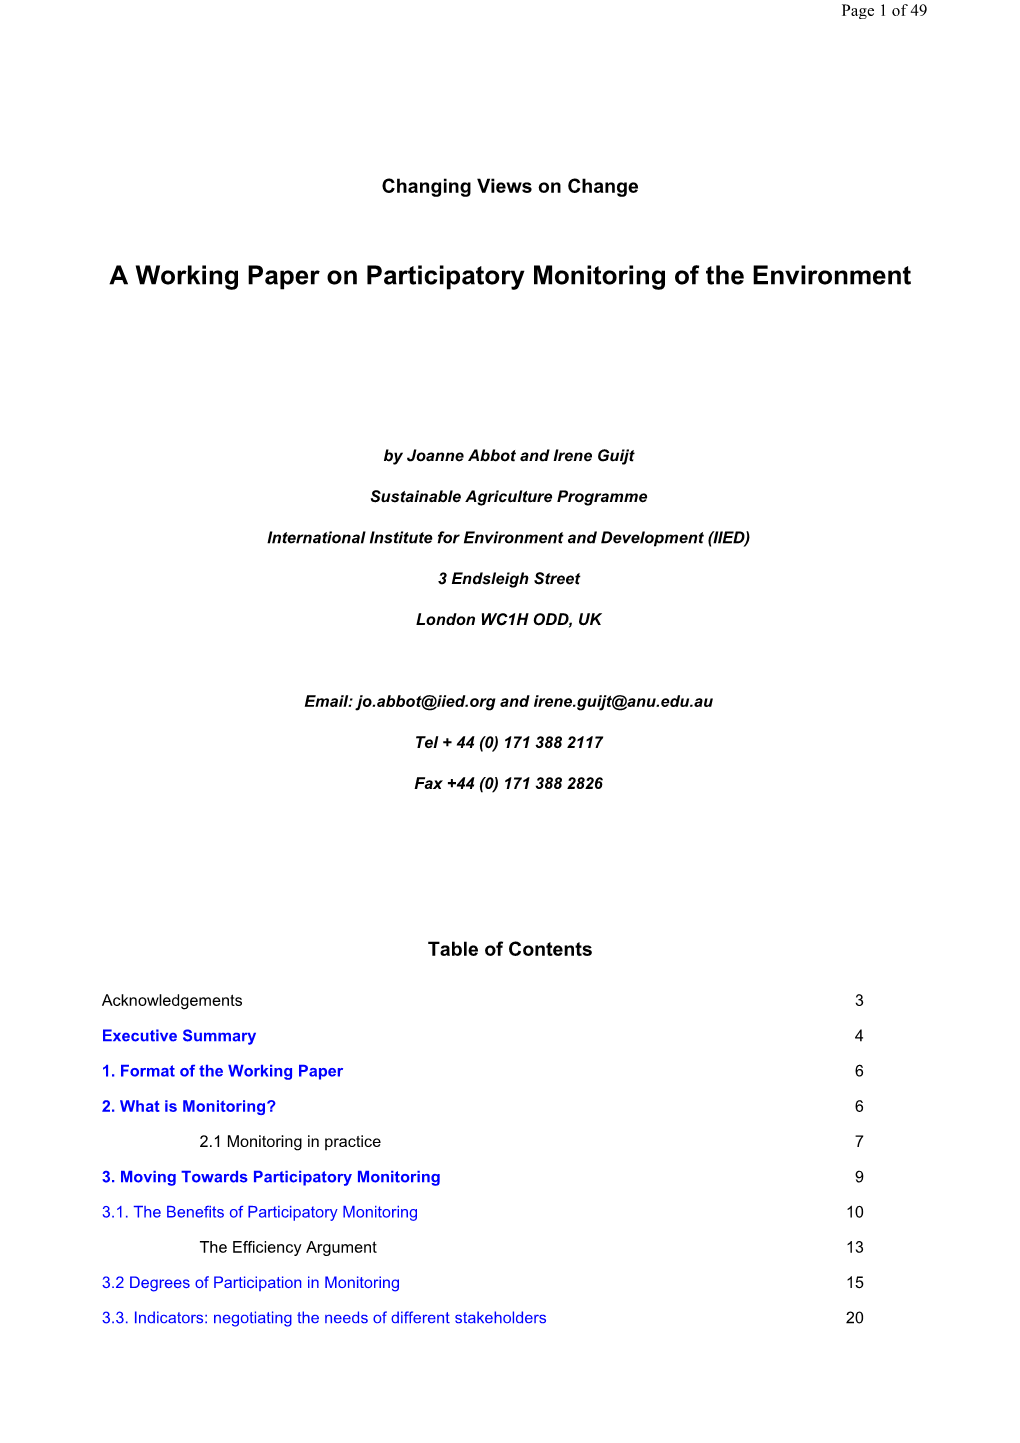 A Working Paper on Participatory Monitoring of the Environment